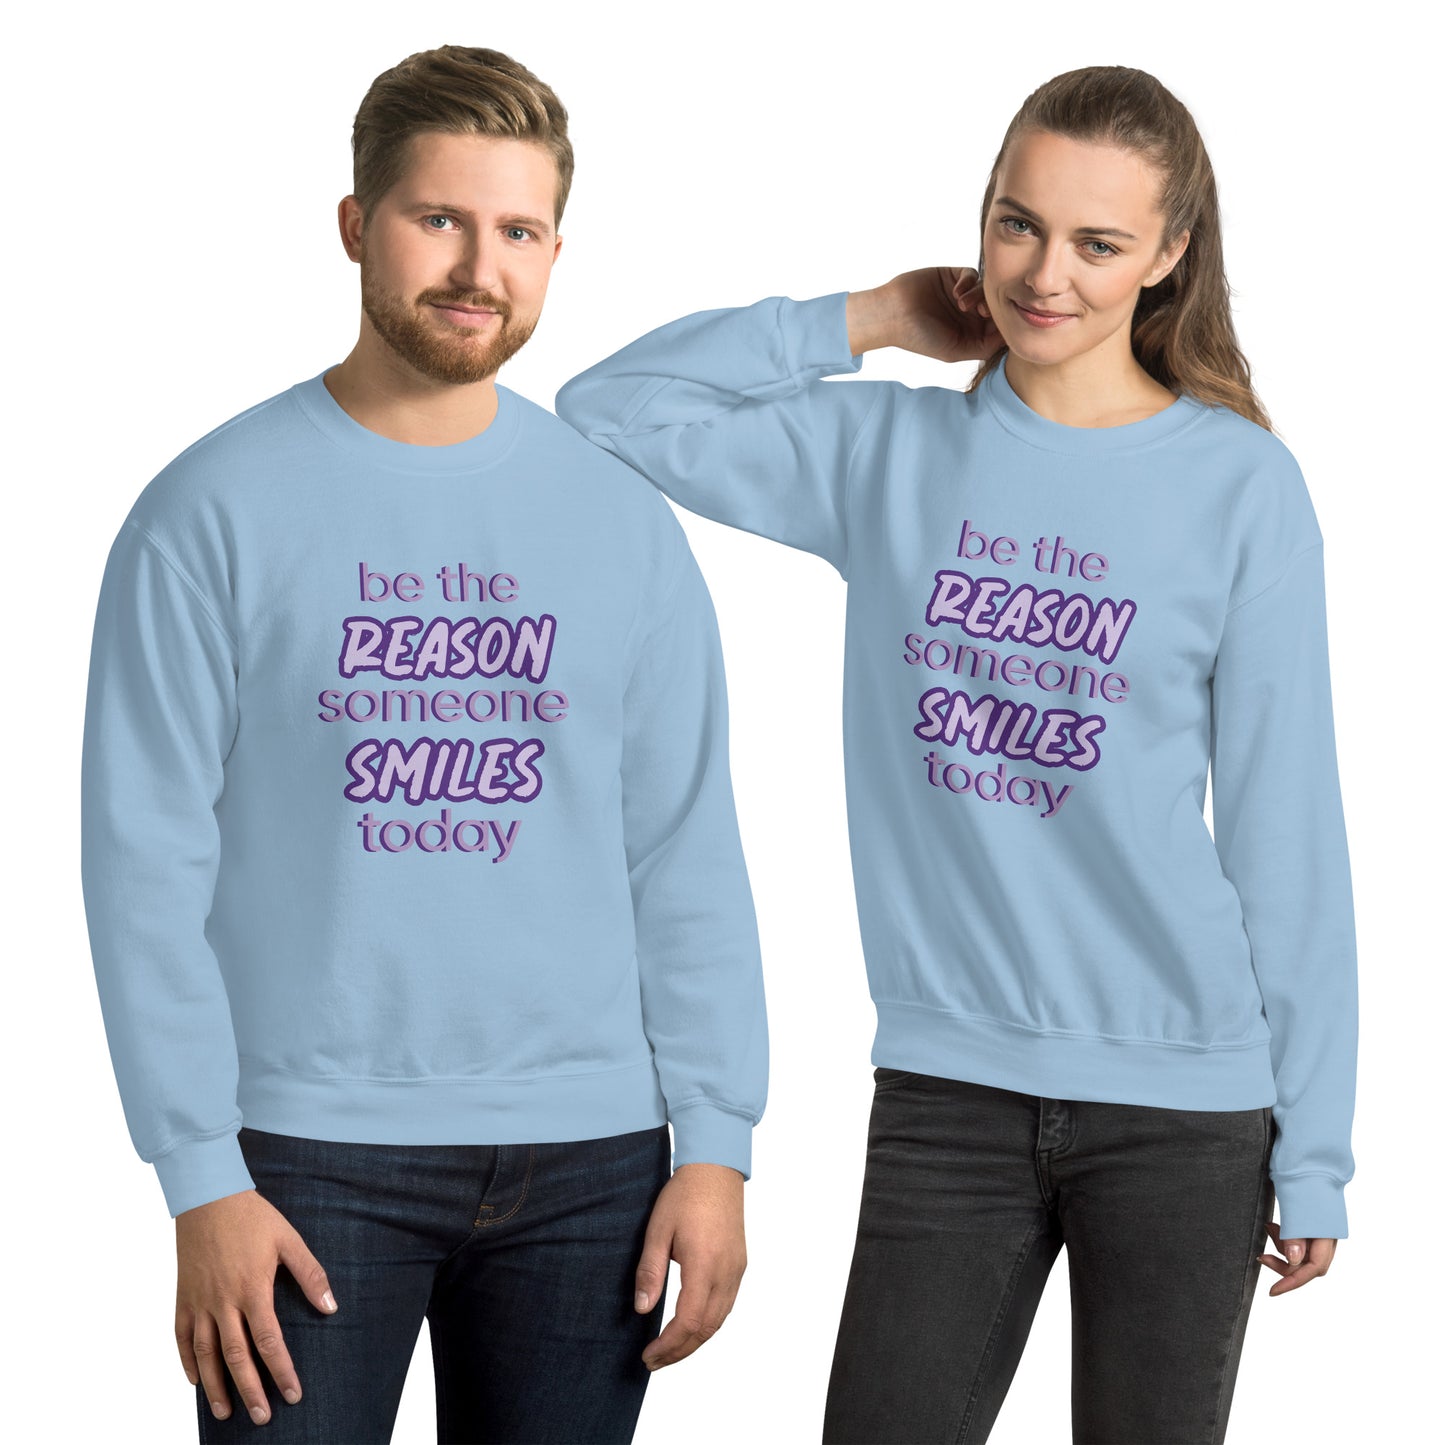 Men and women with light blue sweater and the quote "be the reason someone smiles today" in purple on it. 